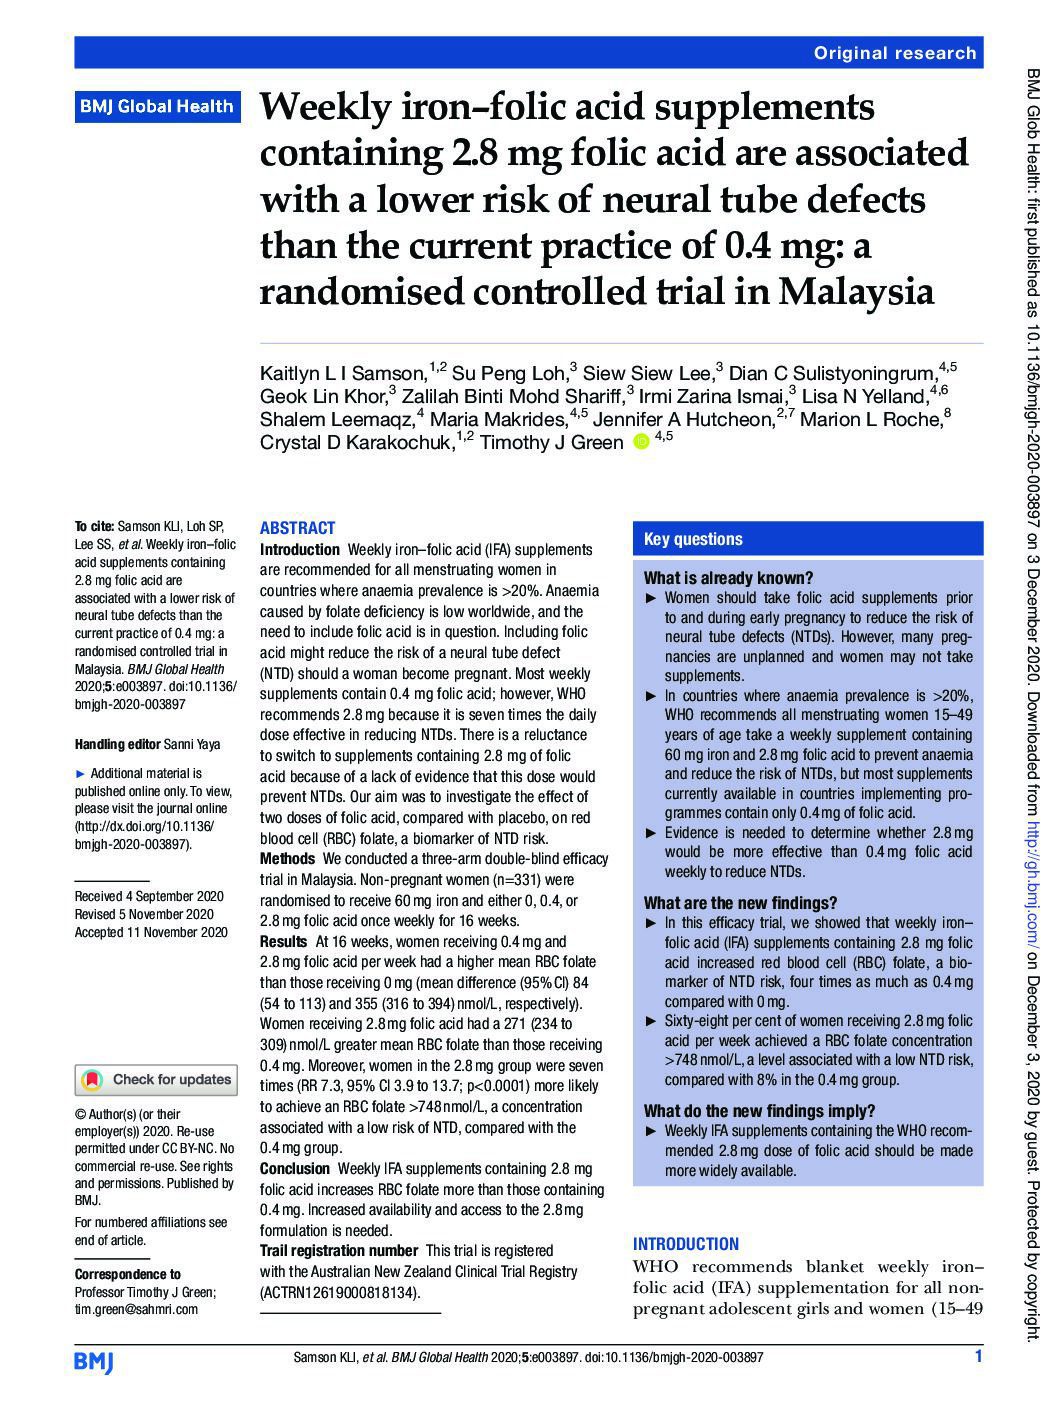 Weekly iron–folic acid supplements containing 2.8 mg folic acid are associated with a lower risk of neural tube defects than the current practice of 0.4 mg: a randomised controlled trial in Malaysia thumbnail